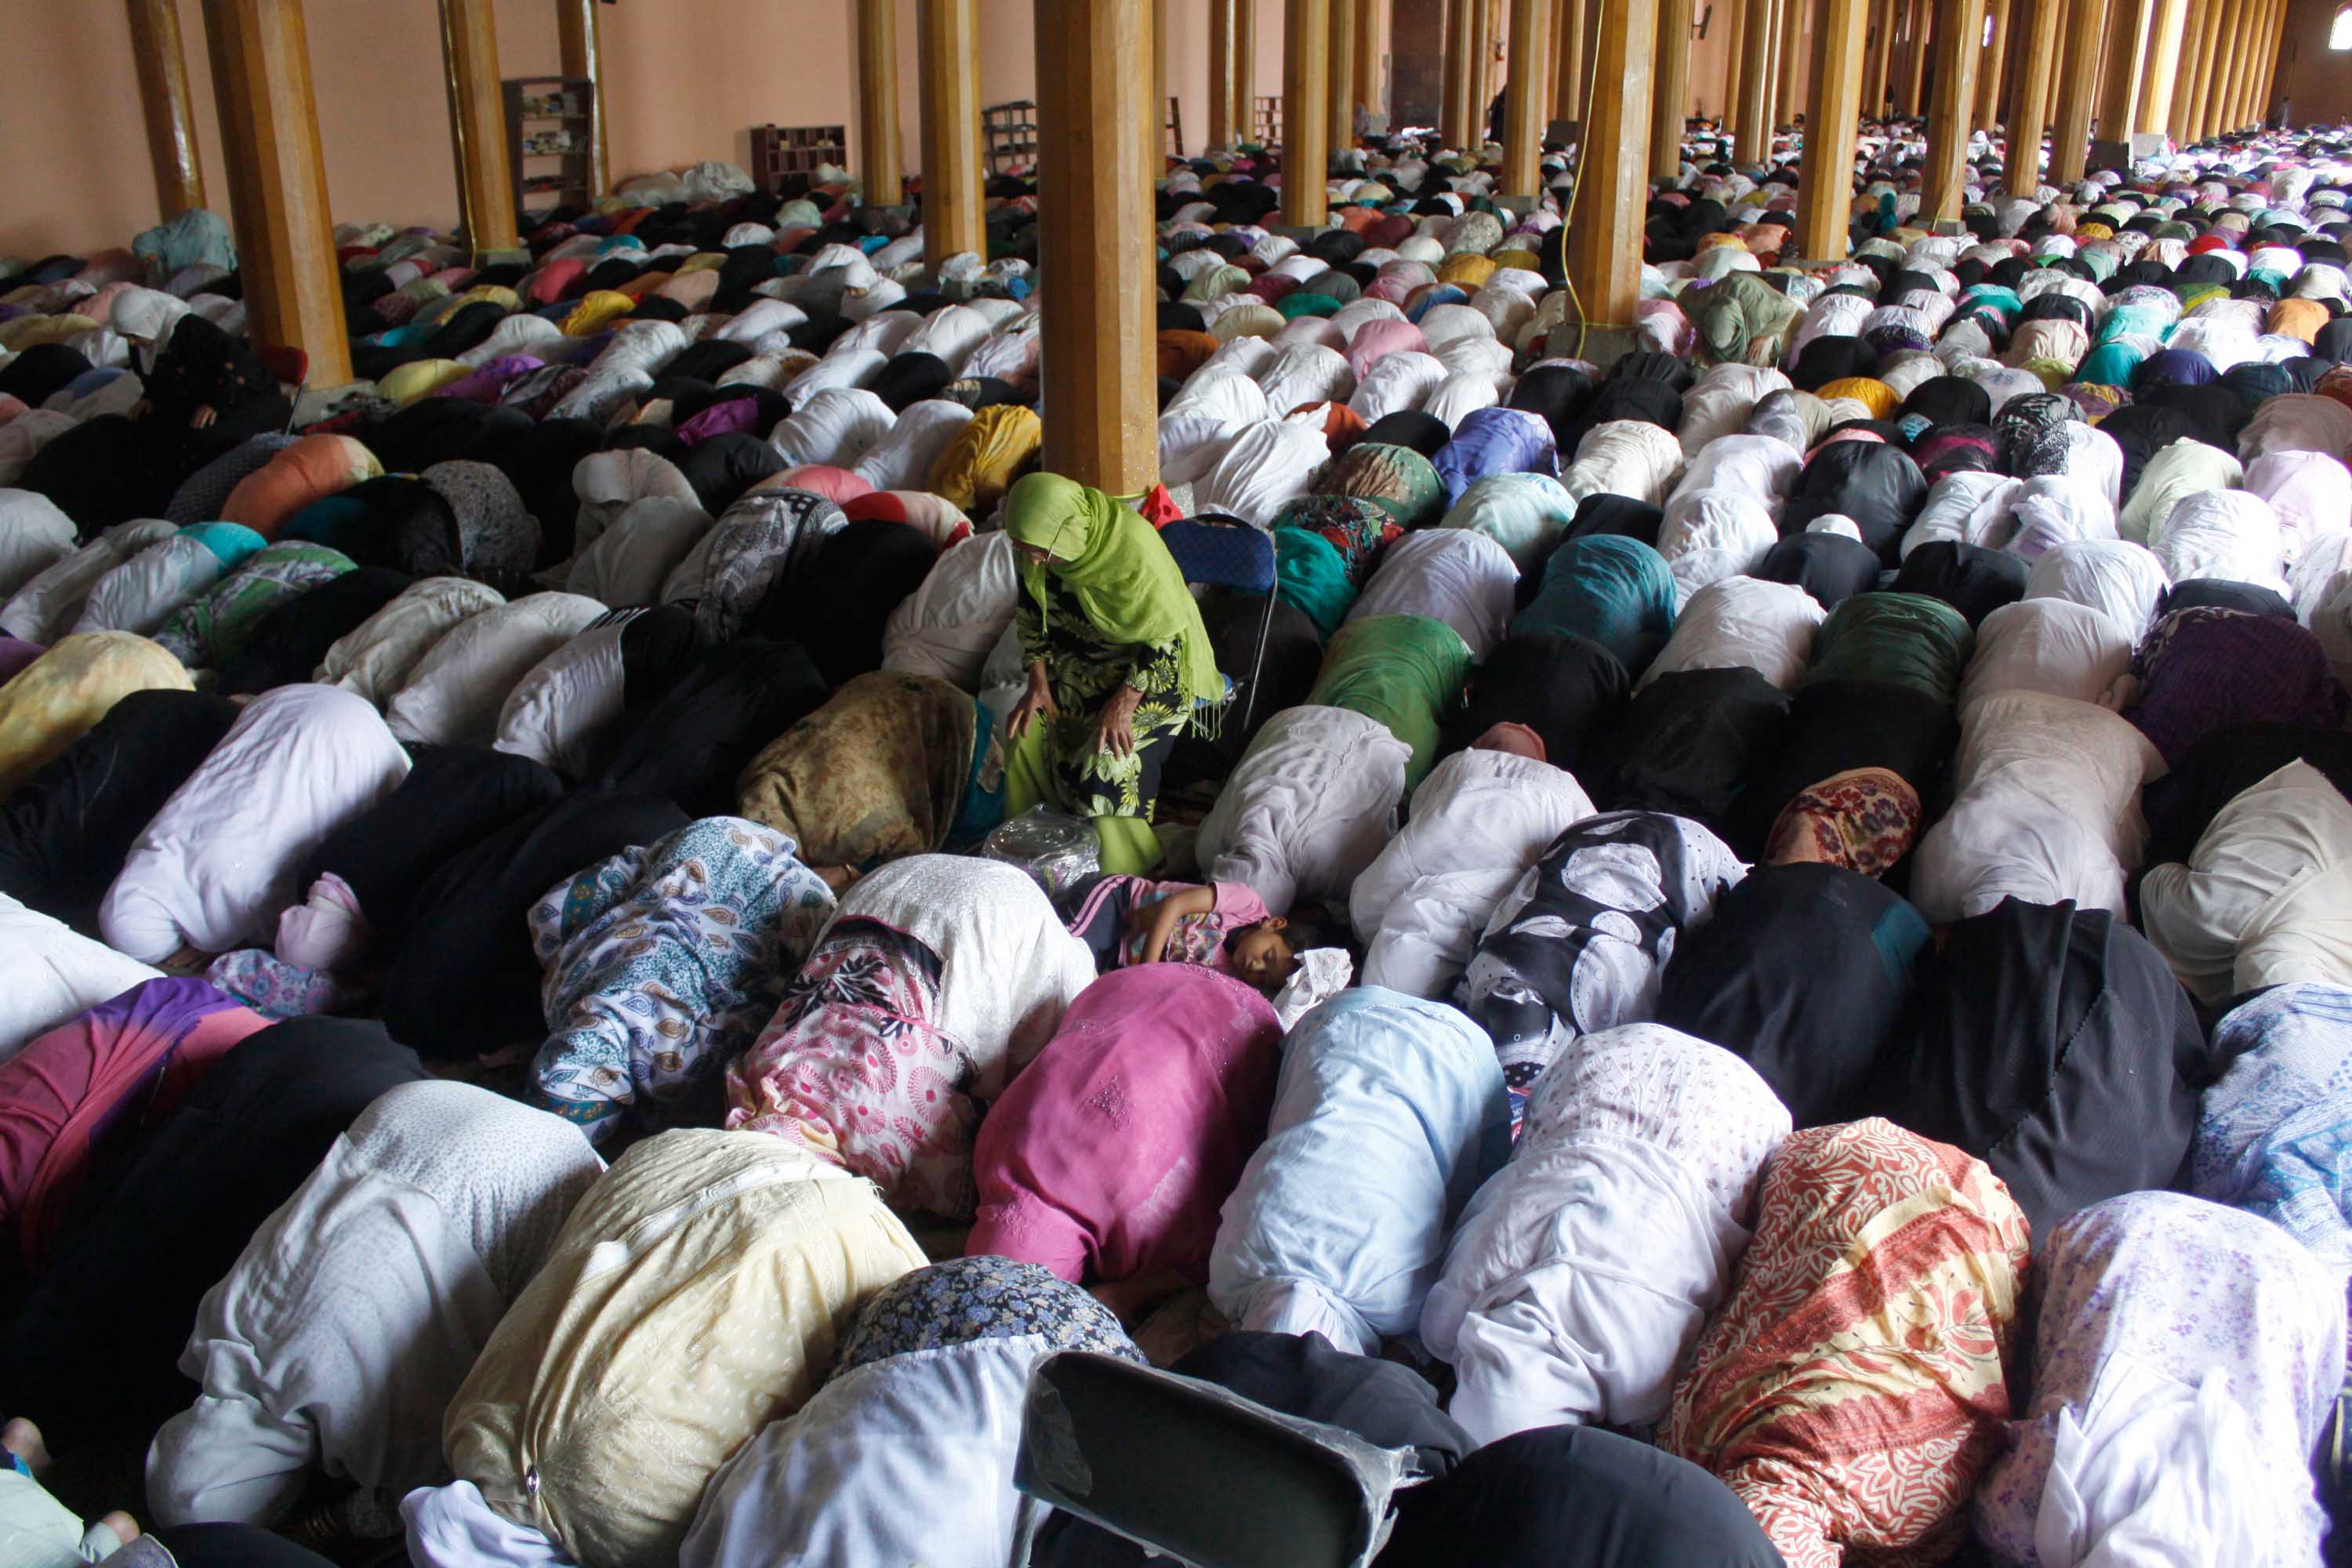 Kashmiri Muslim women pray during the second Friday prayer of Holy month of Ramadan at Jamia Masjid in downtown on July 11, 2014 in Srinagar, India. (Hindustan Times—Hindustan Times via Getty Images)